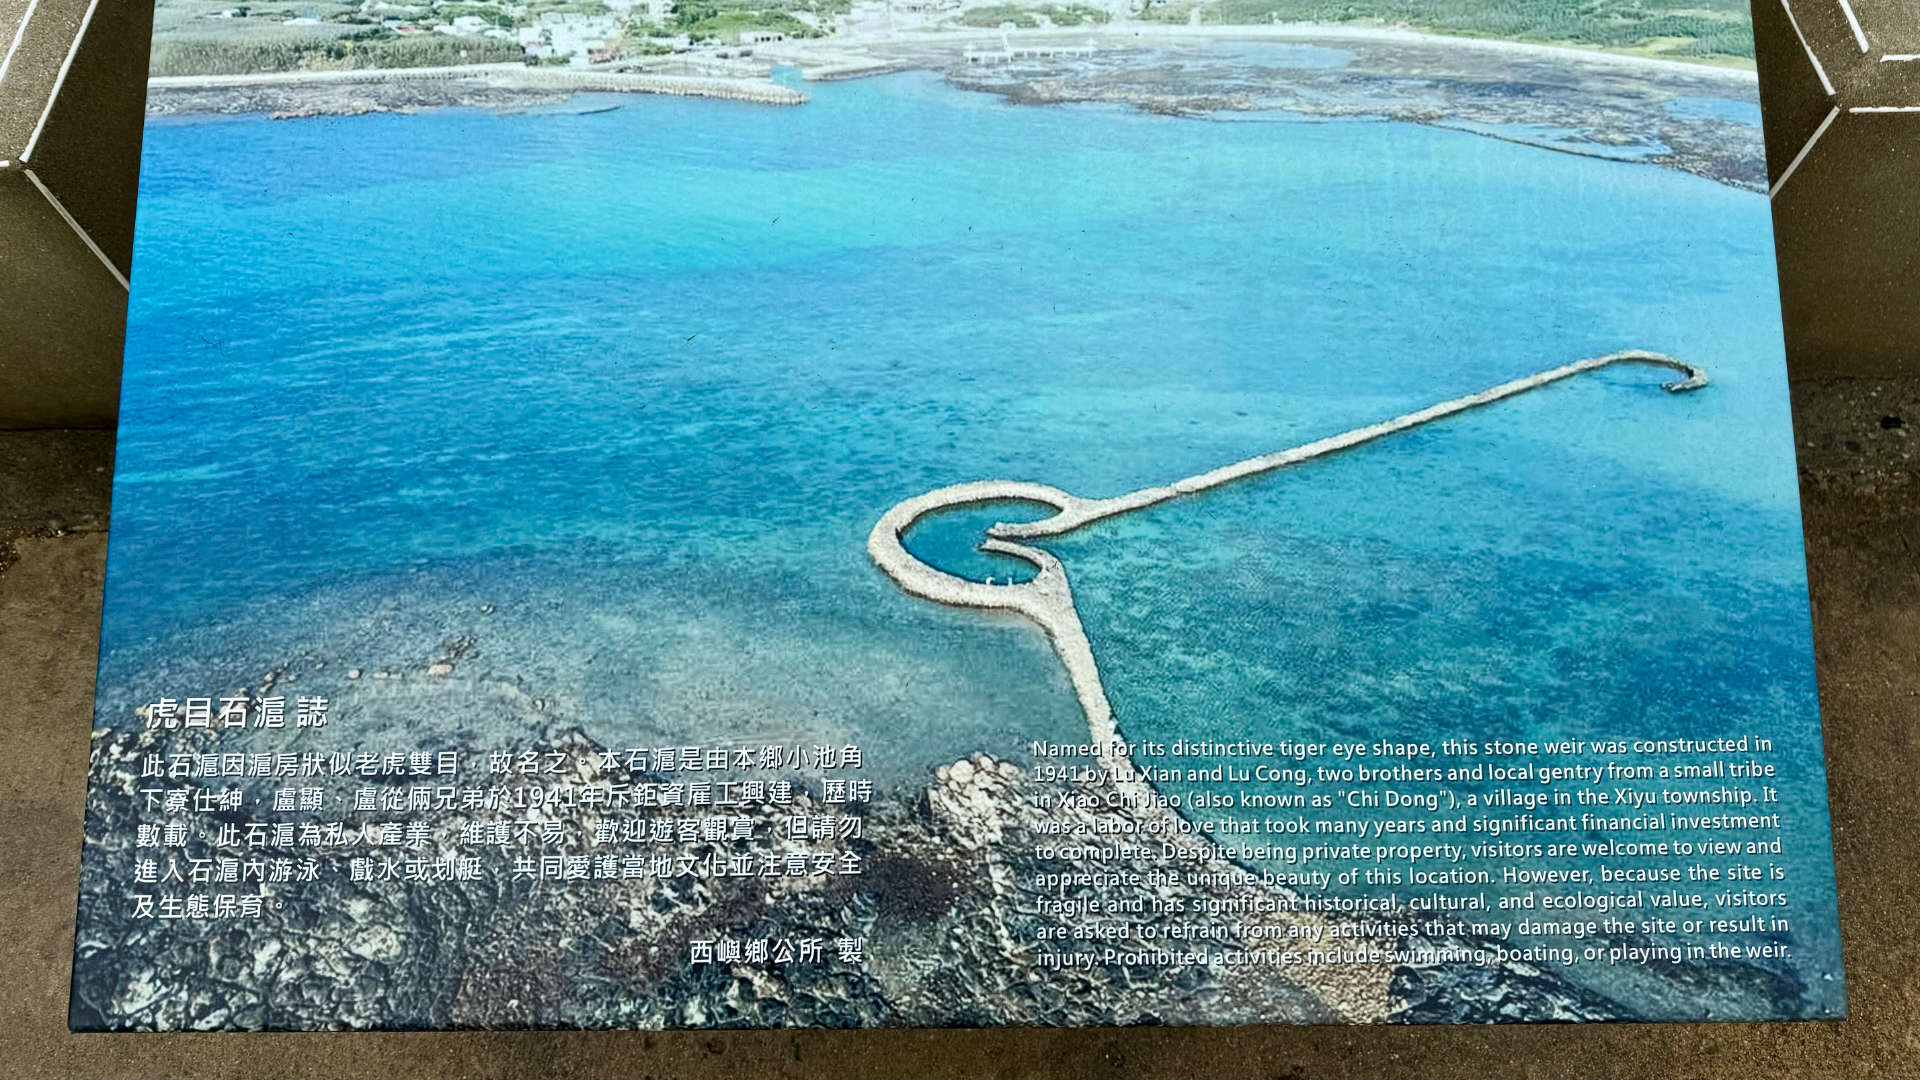 Information sign about Penghu Tiger Eye Stone Weir.